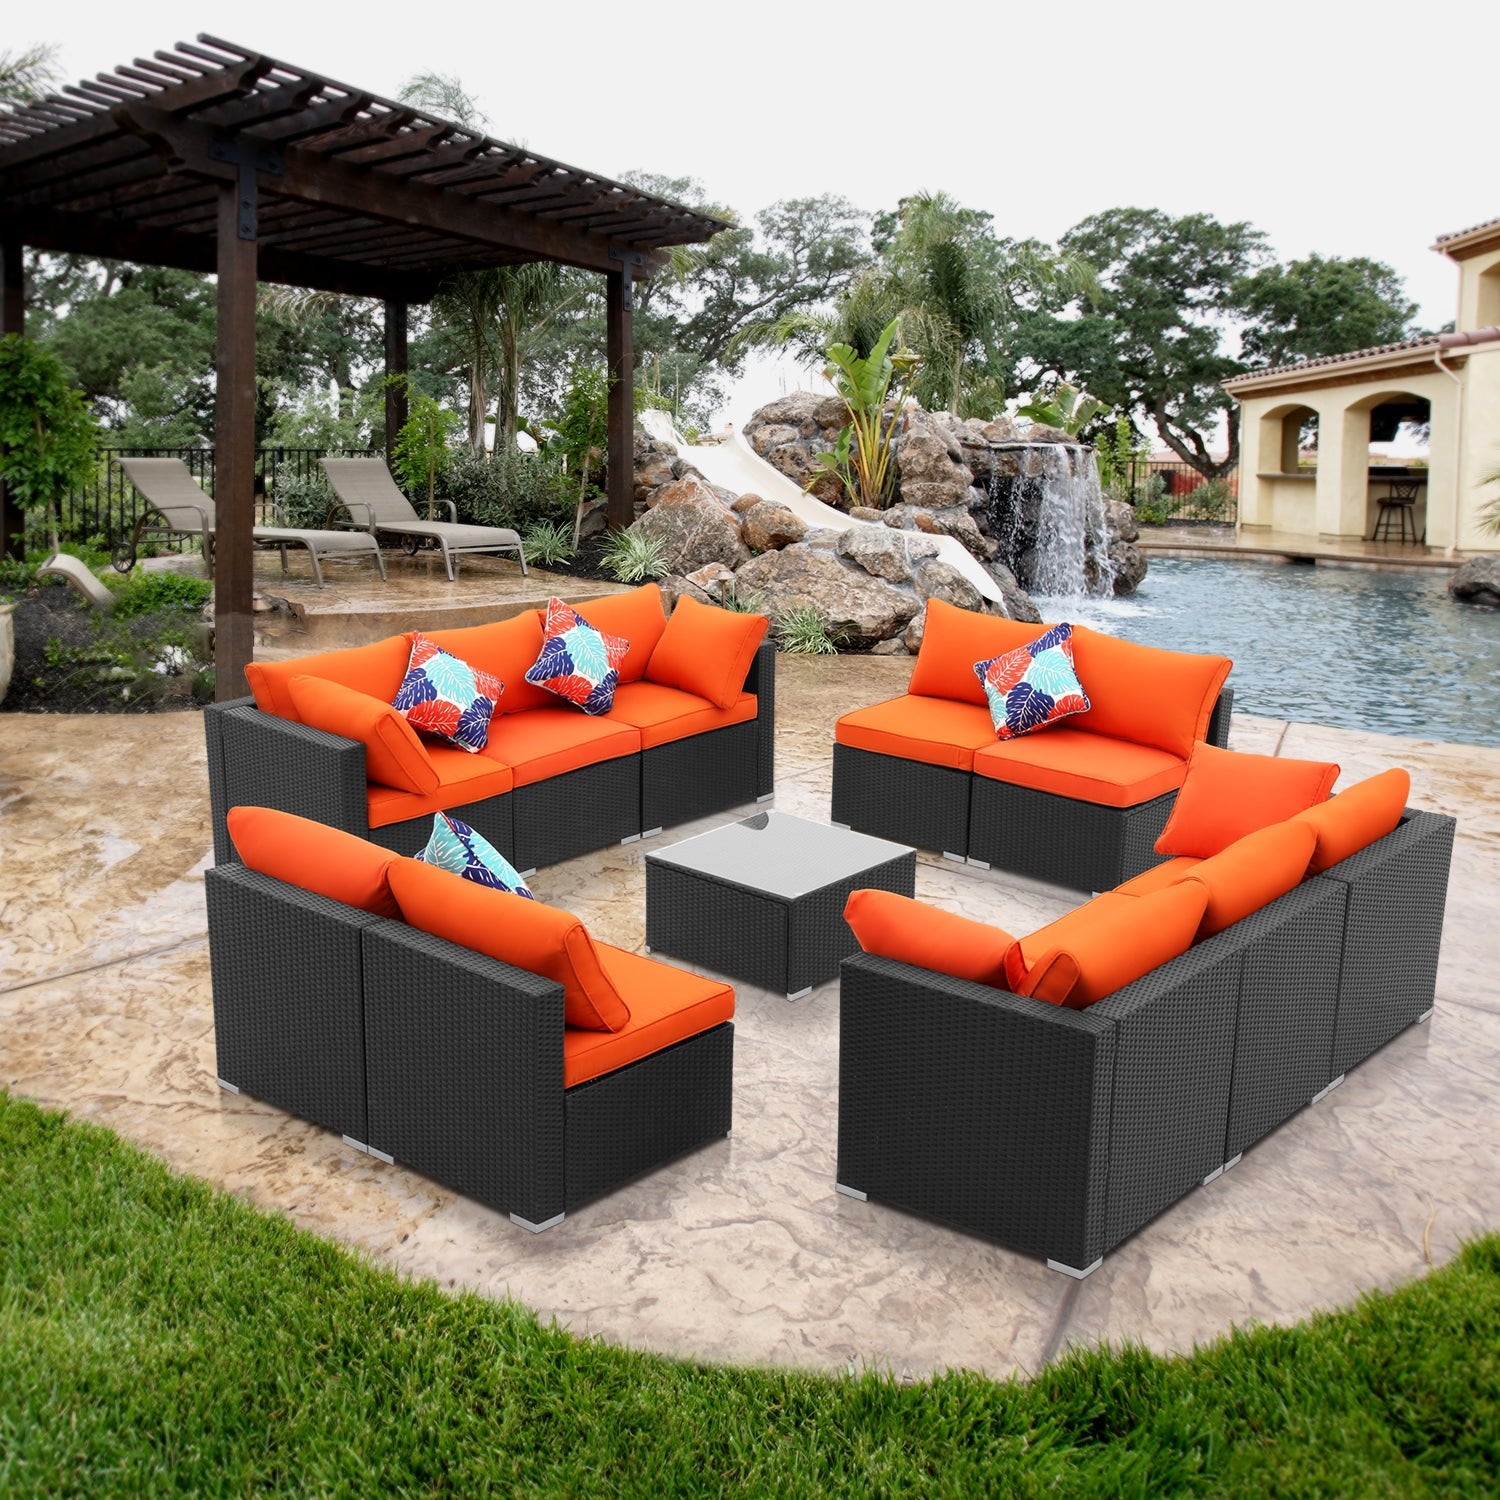 11 Pieces Outdoor Patio Furniture Sofa Set Wicker Sectional Rattan Conversation Set with Cushion and Glass Table